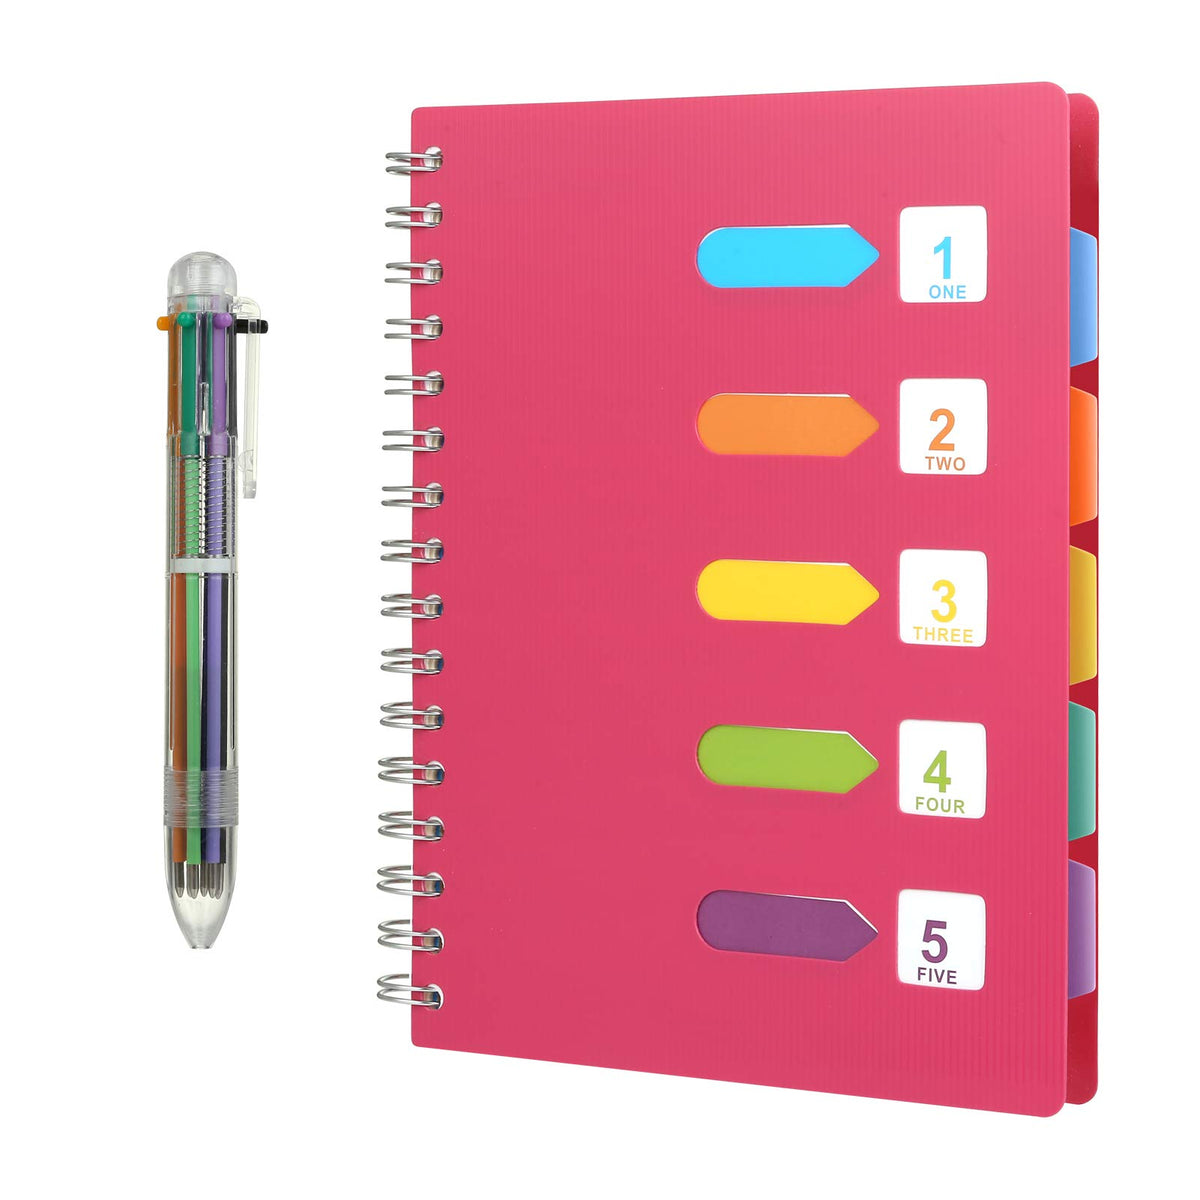 Kesote Lined Notebook with Multicolor Pen, Subject Notebook 120 Pages A5 Journal with 5 Colored Tab& 6-in-1 Retractable Ballpoint Color Pen - Rose Pink